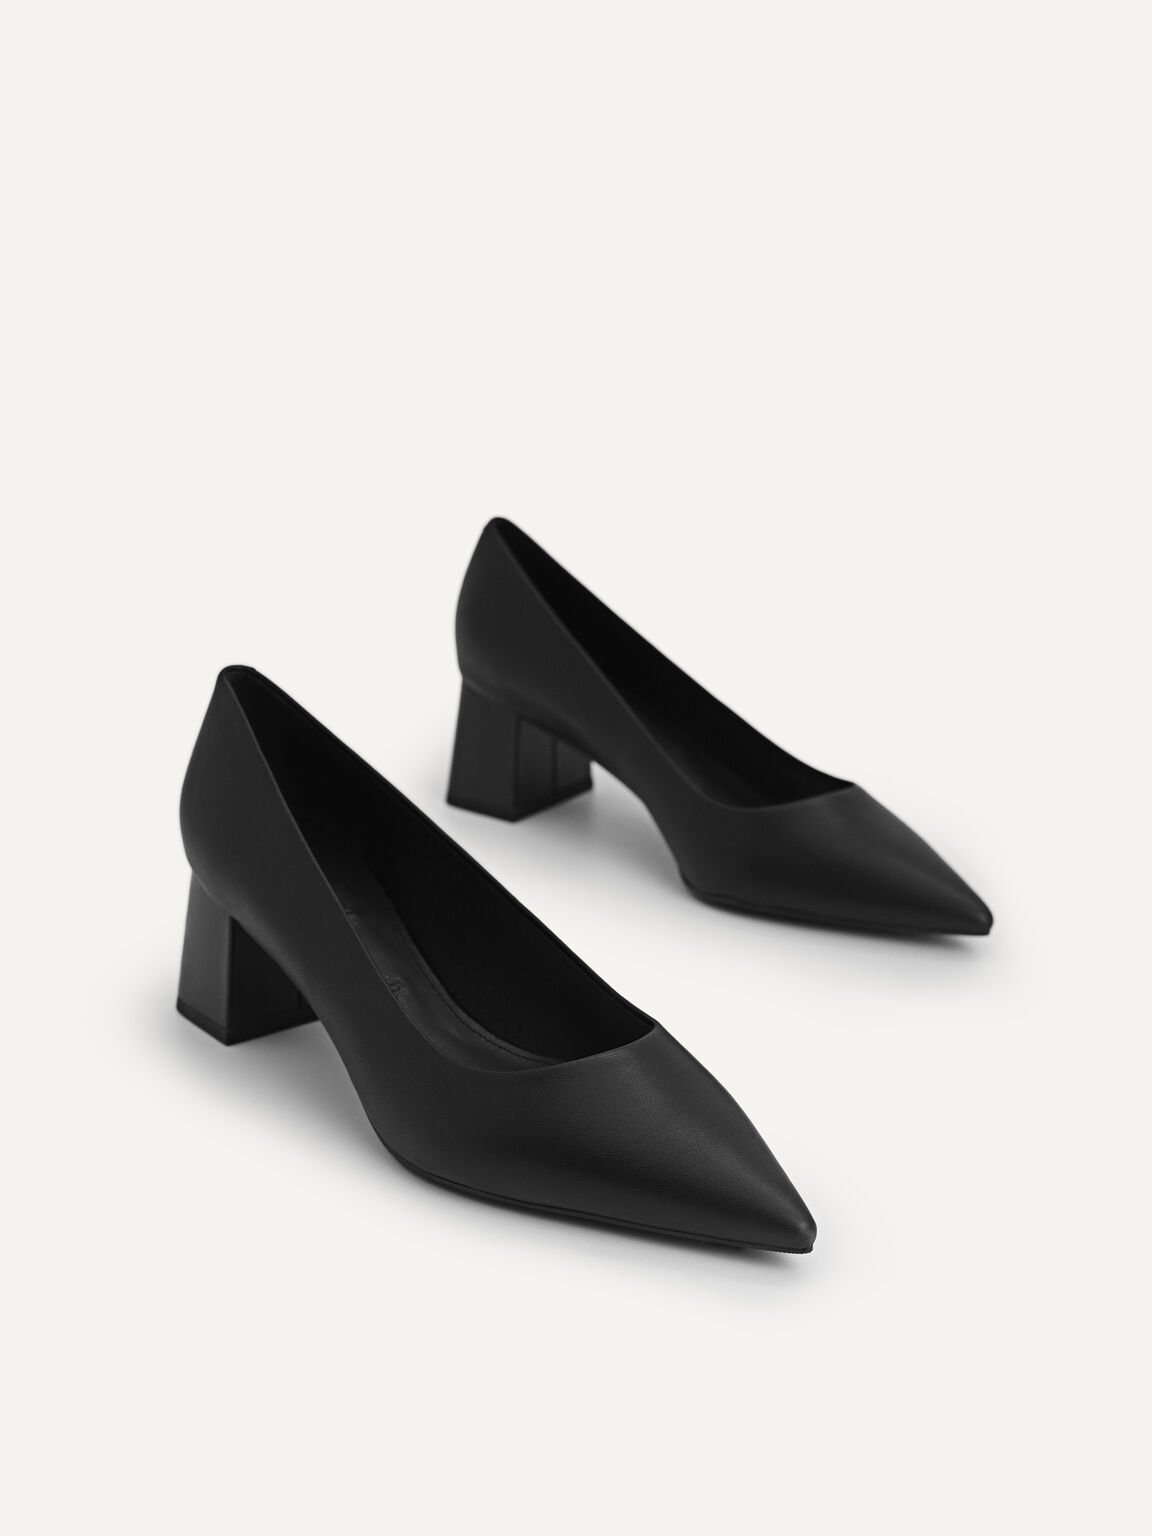 Leather Pointed Toe Pumps, Black, hi-res